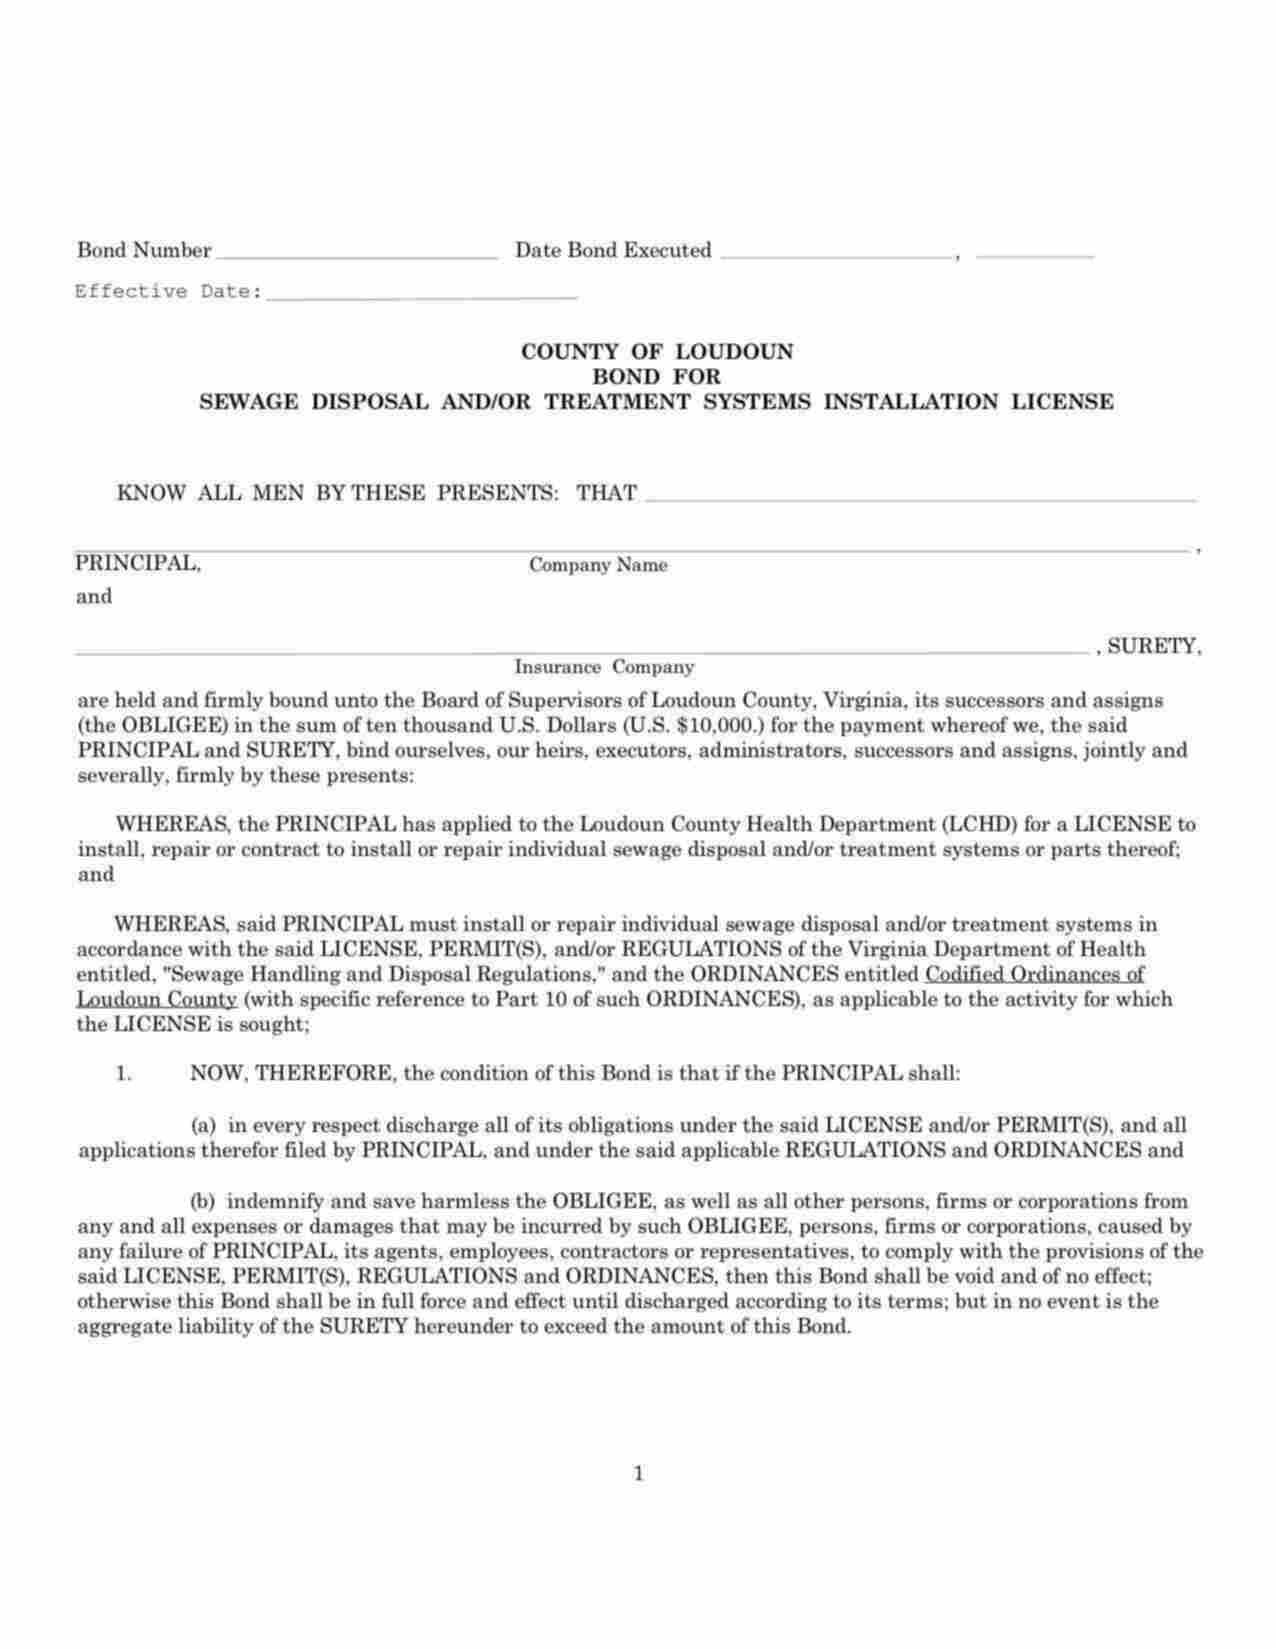 Virginia Sewage Disposal and/or Treatment Systems Installation Bond Form